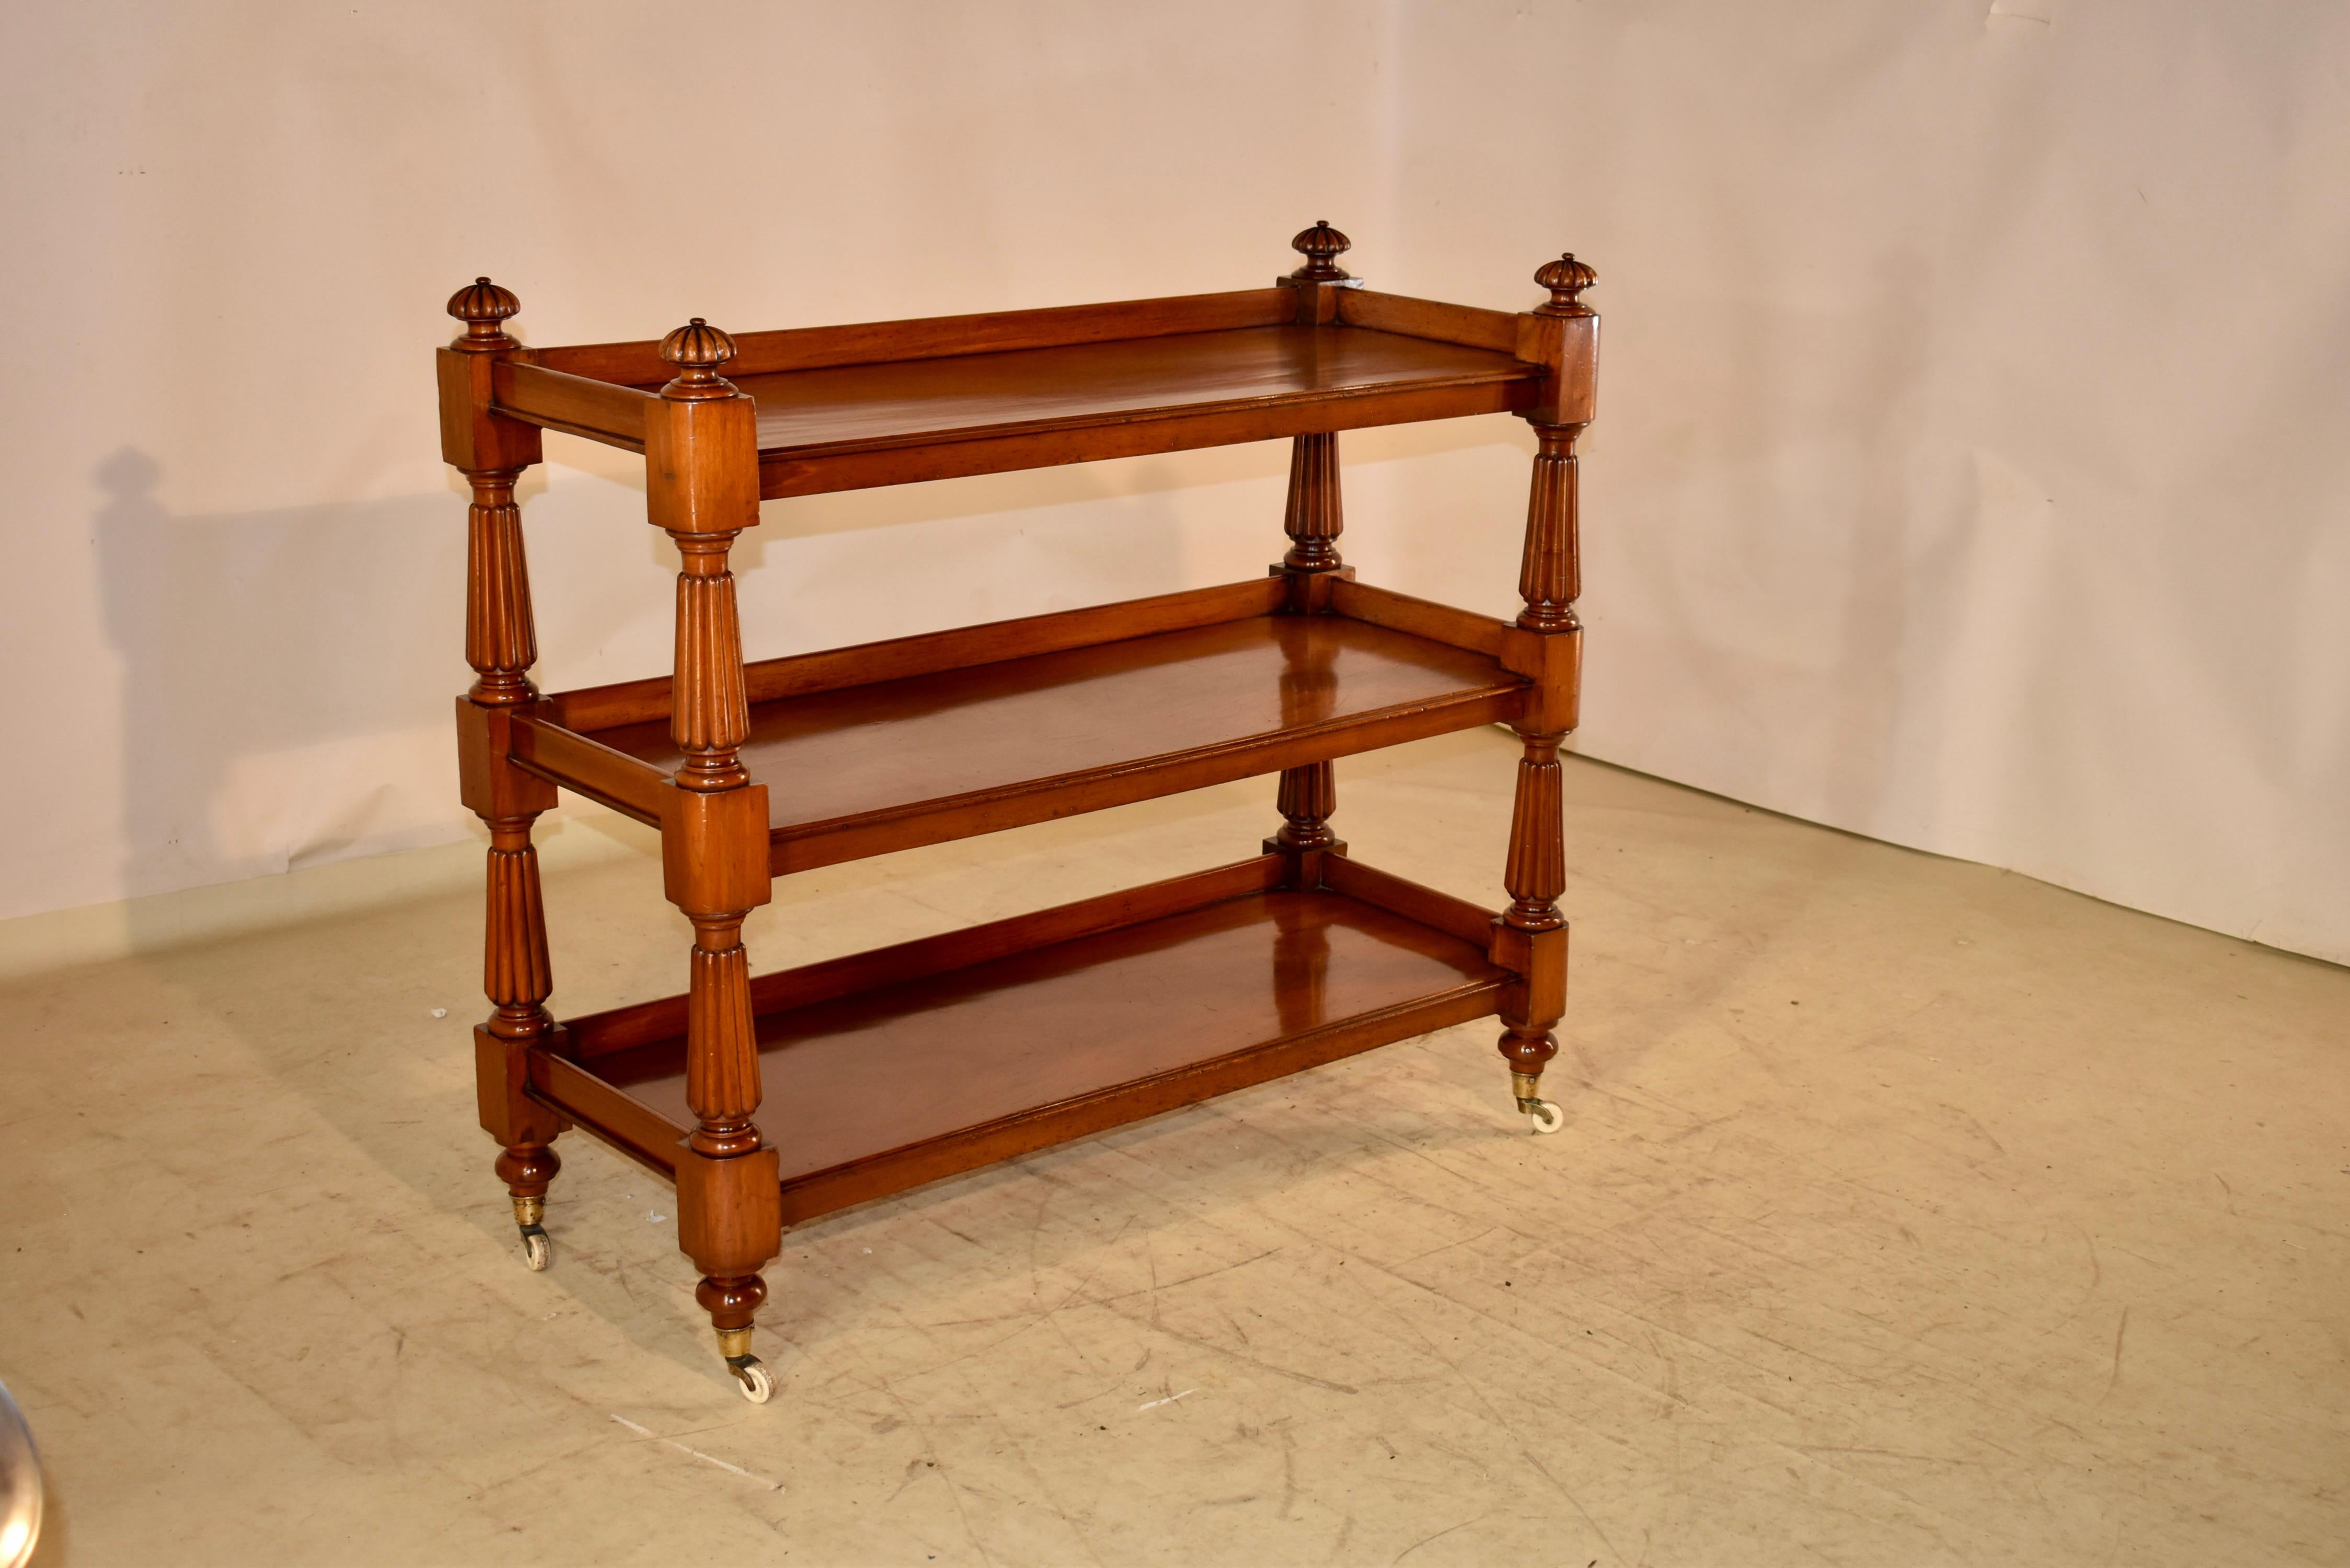 19th century mahogany buffet from England.  The top is decorated with turned and reeded finials over galleried shelves.  There are three shelves, all made from single wide planks of gloriously grained mahogany.  The shelves are separated by hand